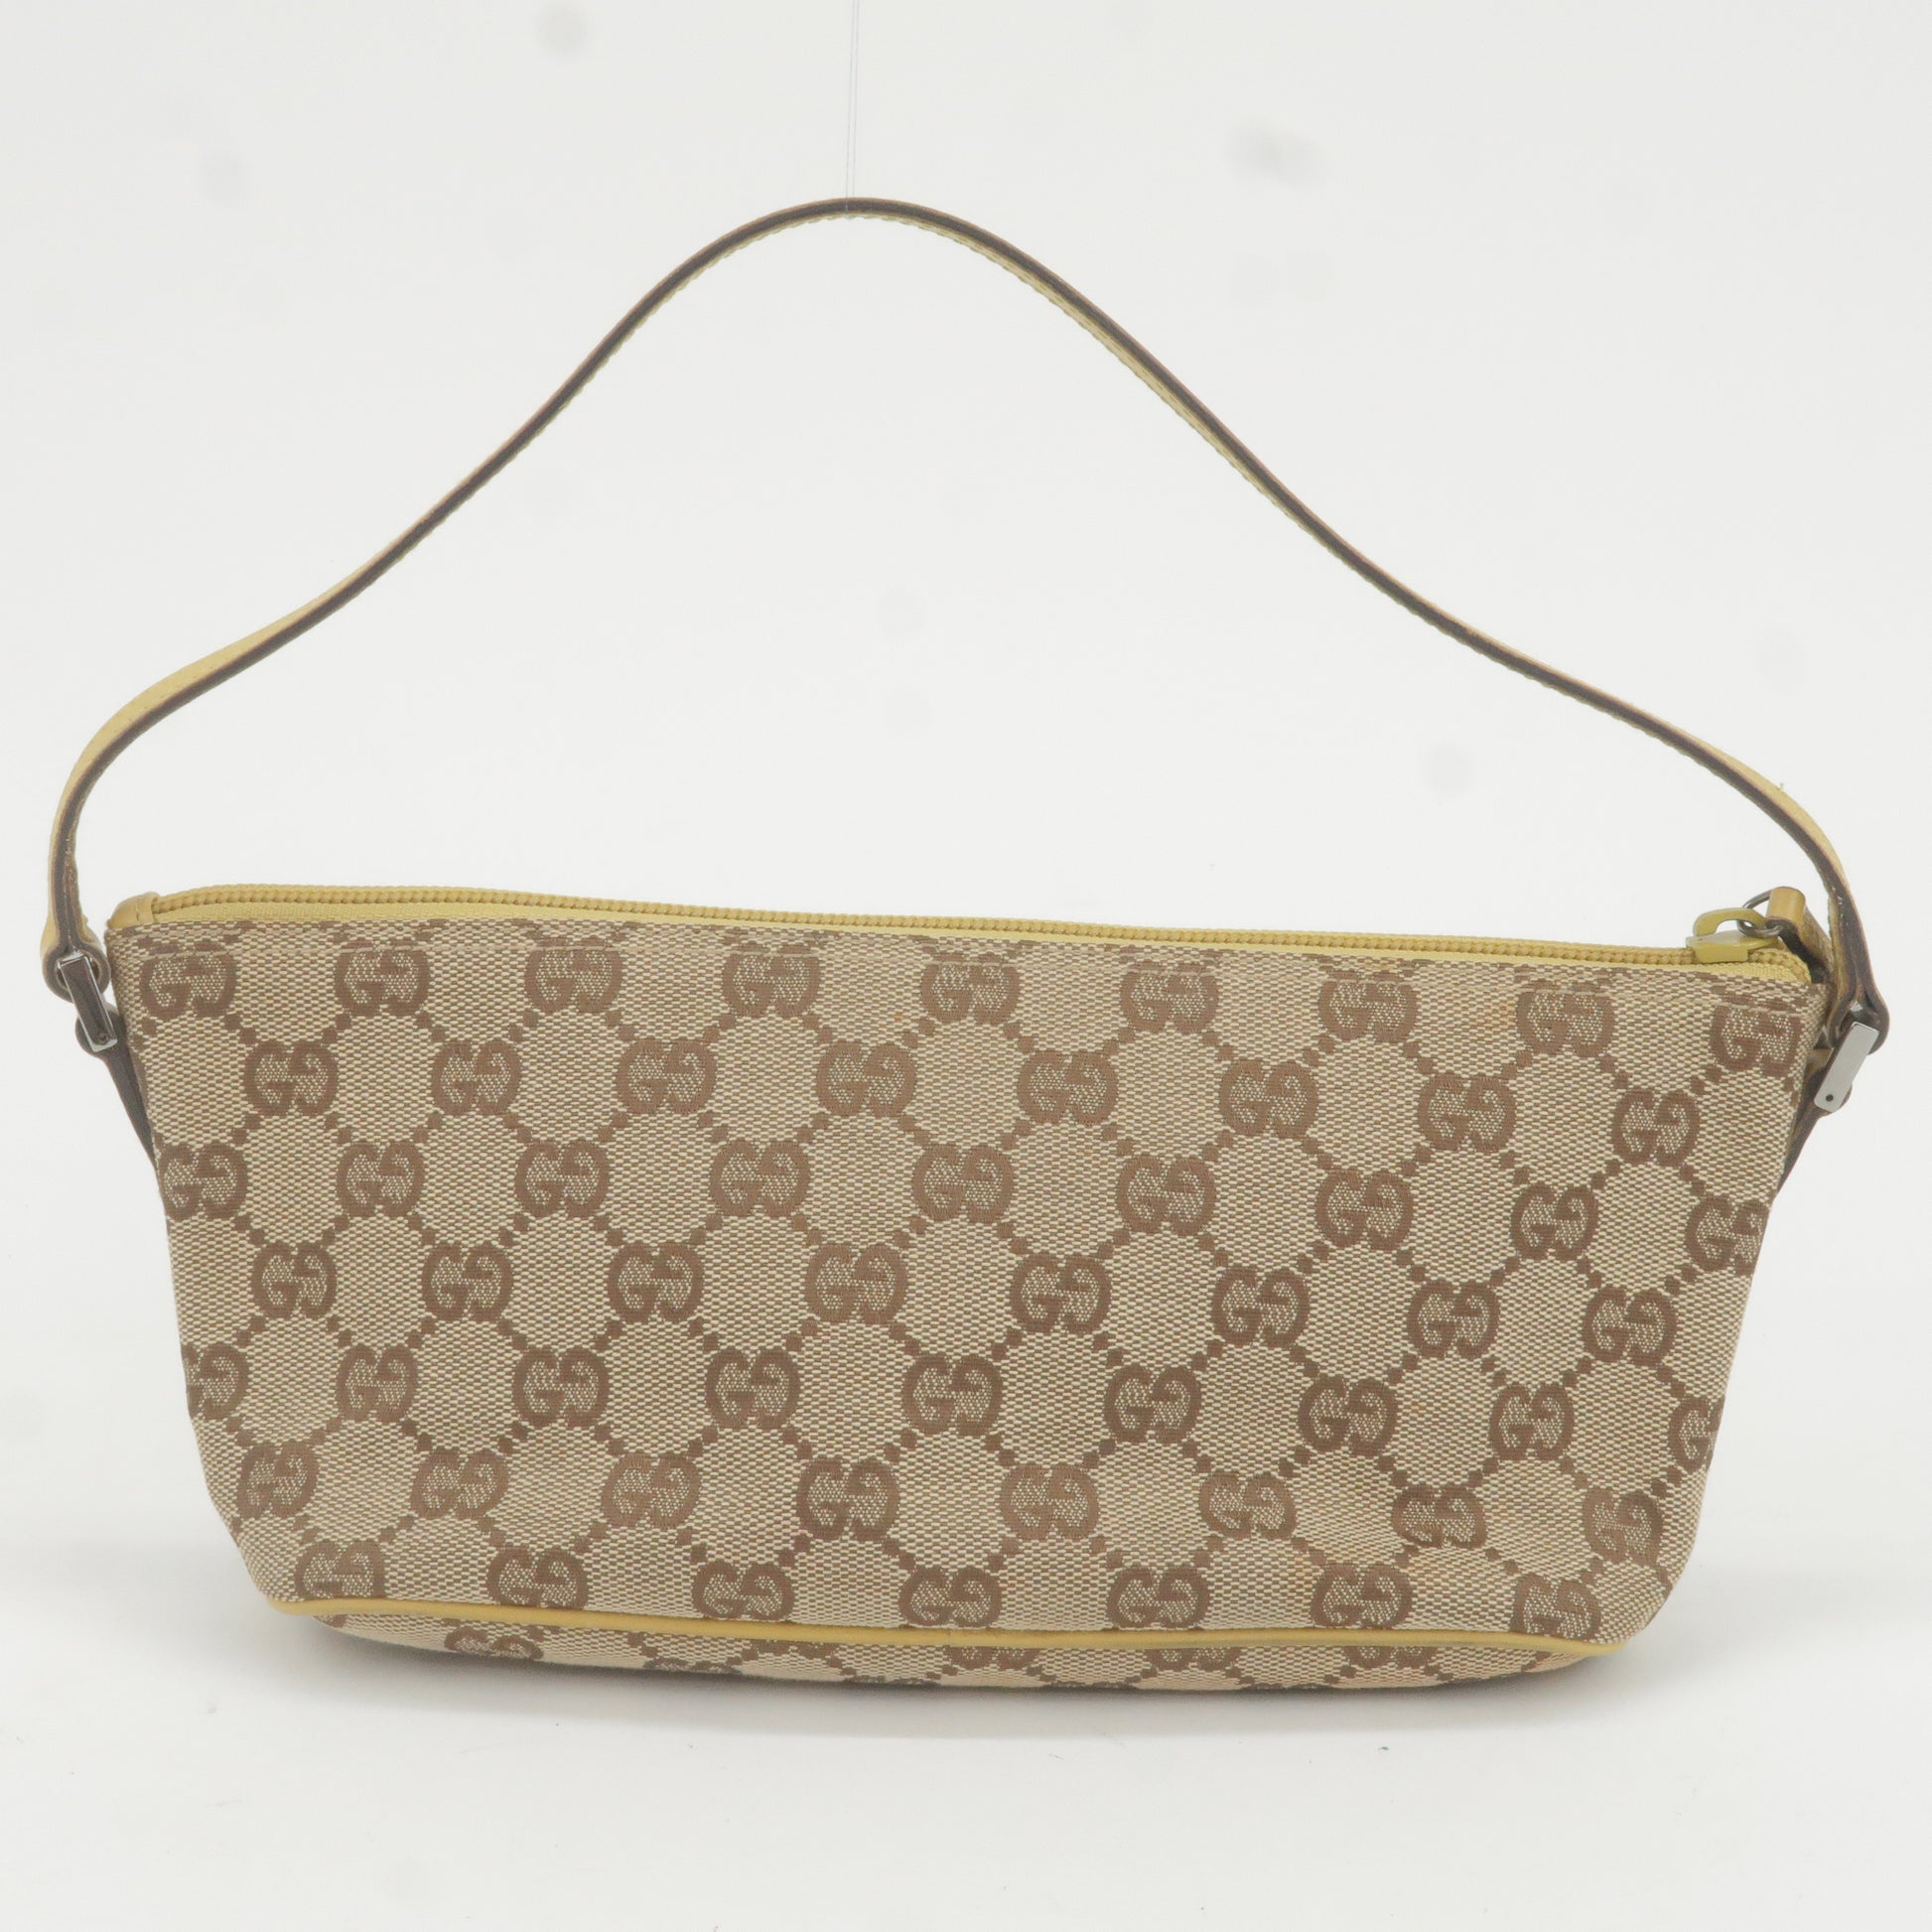 GUCCI-GG-Canvas-Leather-Boat-Bag-Hand-Bag-Brown-07198 – dct-ep_vintage  luxury Store